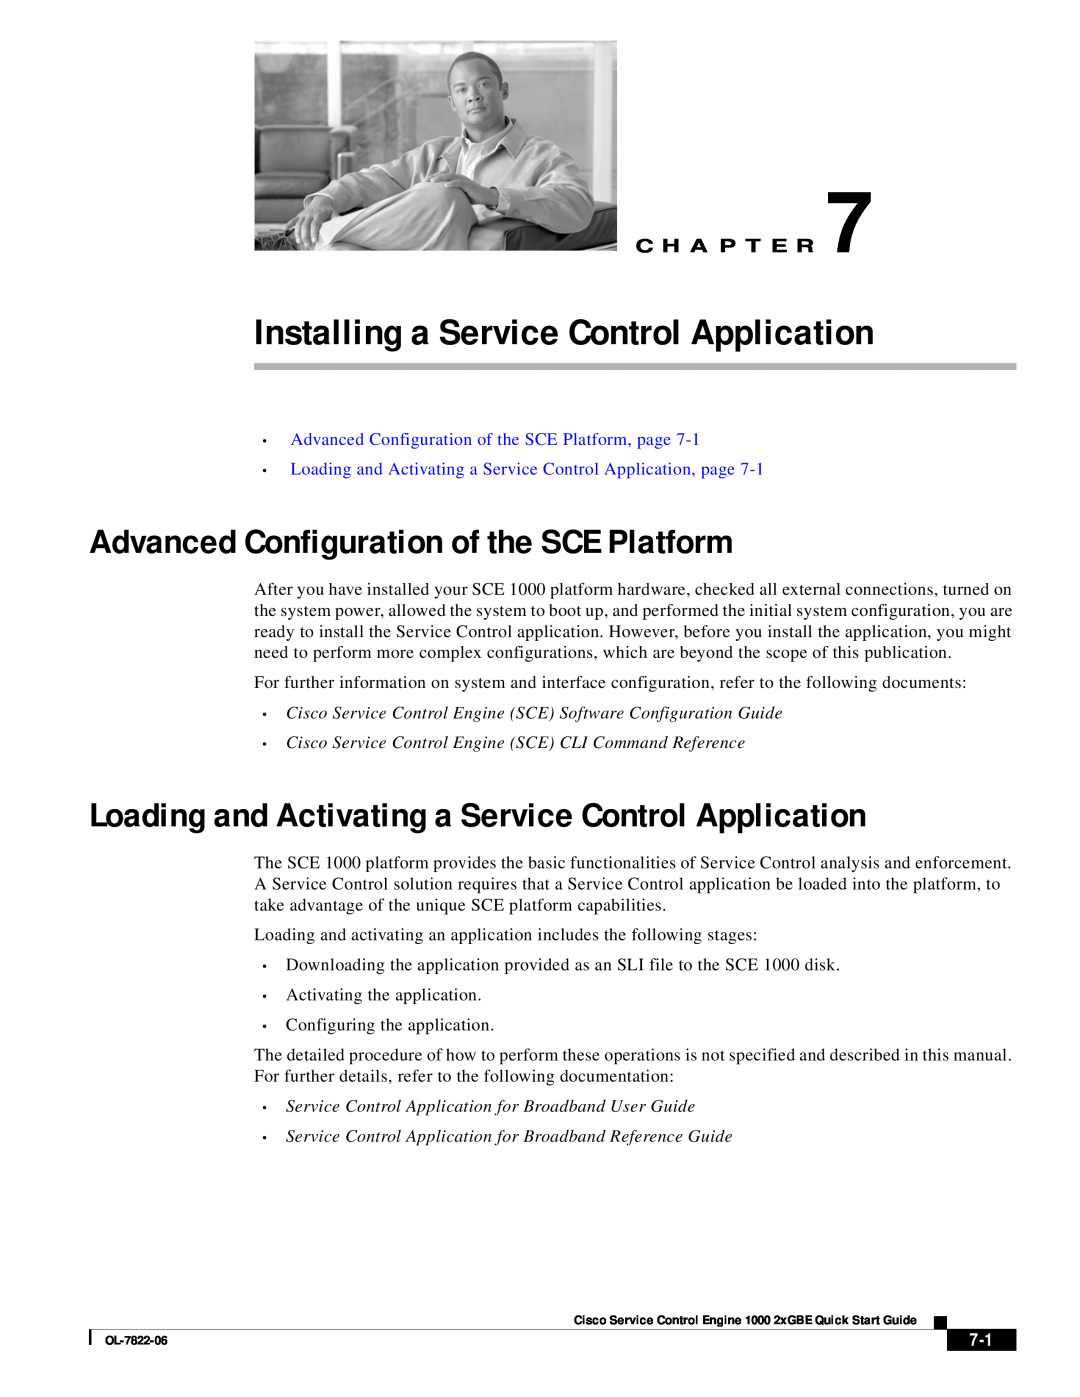 Cisco Systems OL-7822-06 quick start Installing a Service Control Application, Advanced Configuration of the SCE Platform 